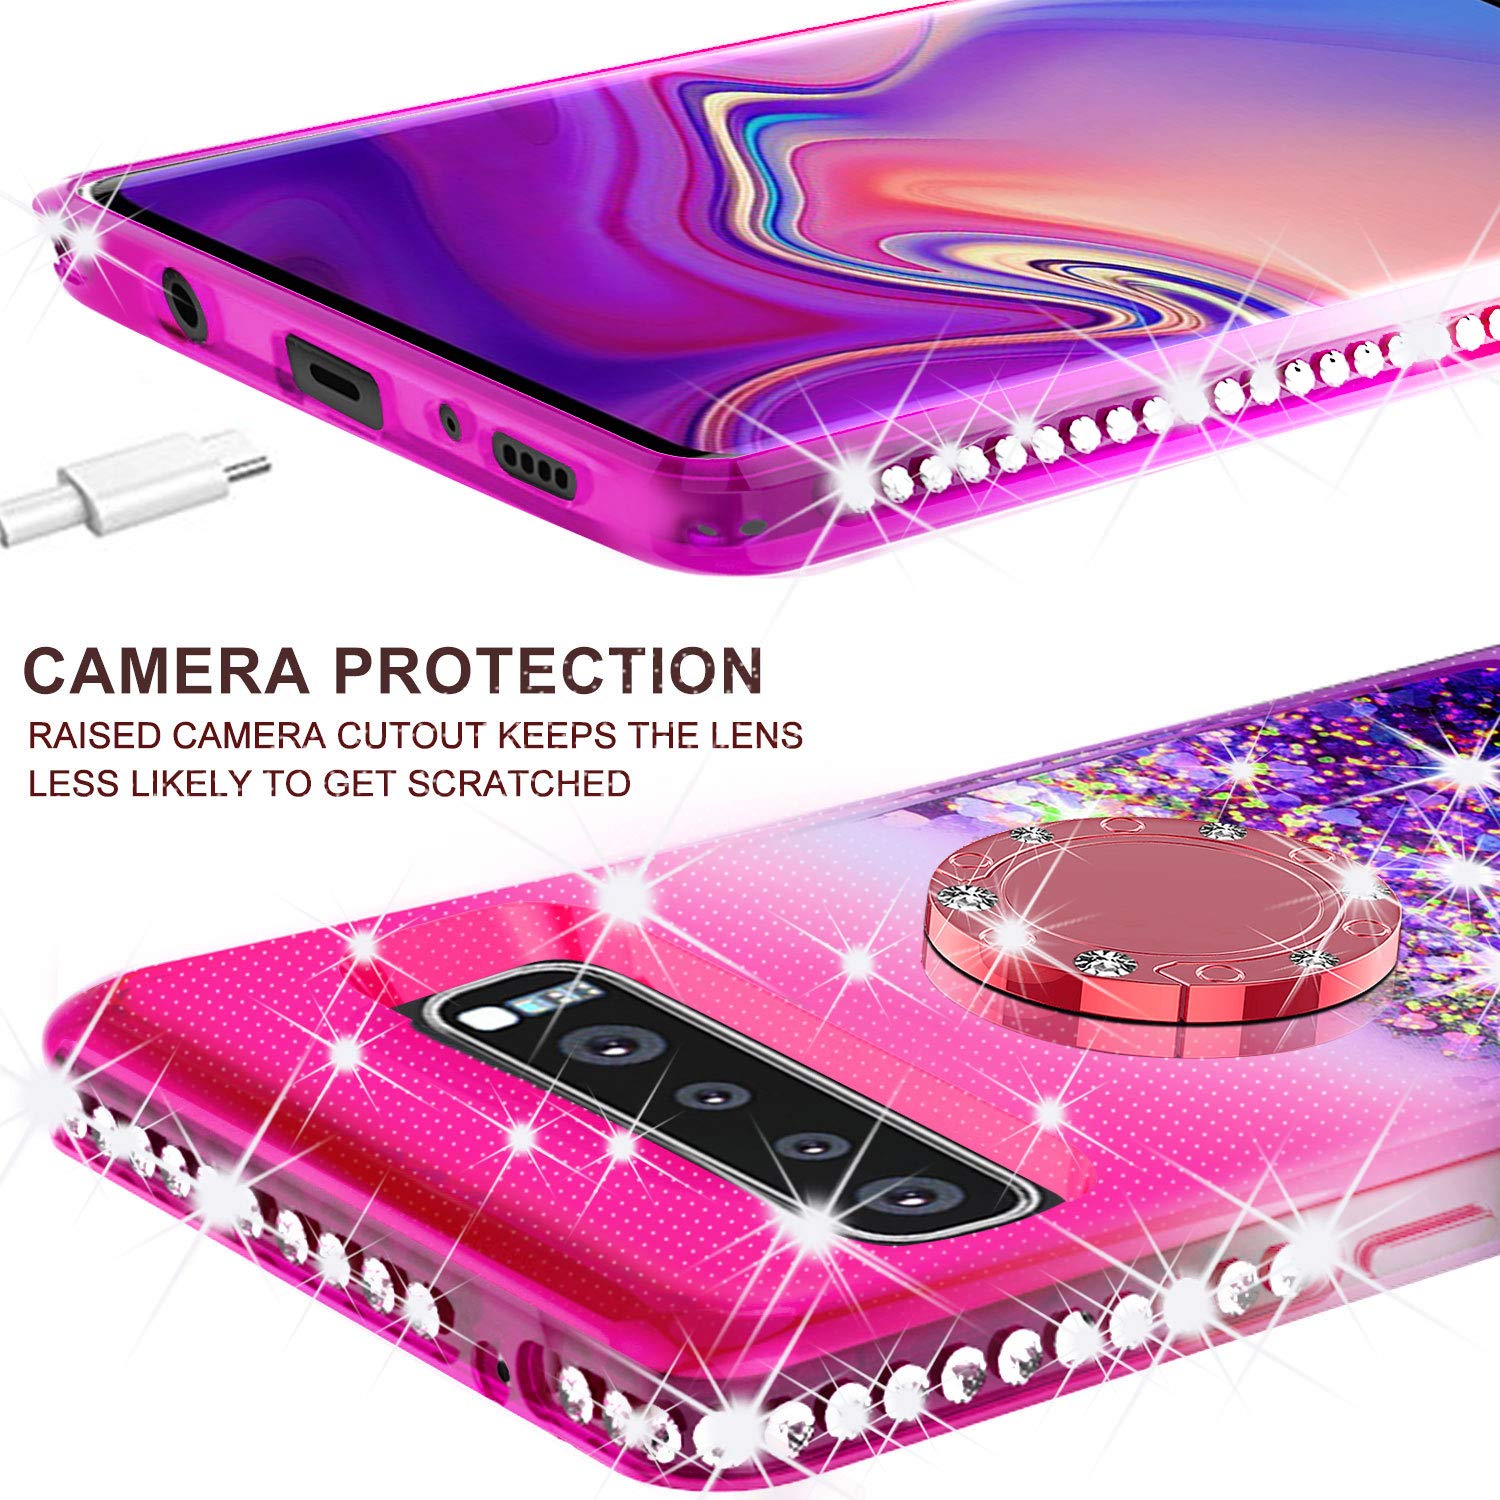 For Samsung Galaxy S10 Case,Ring Stand Glitter Liquid Quicksand Waterfall Floating Sparkle Shiny Bling Diamond Girls Cute Shock Proof Phone Case Cover for Galaxy S10 - Hot Pink/Blue - image 4 of 5